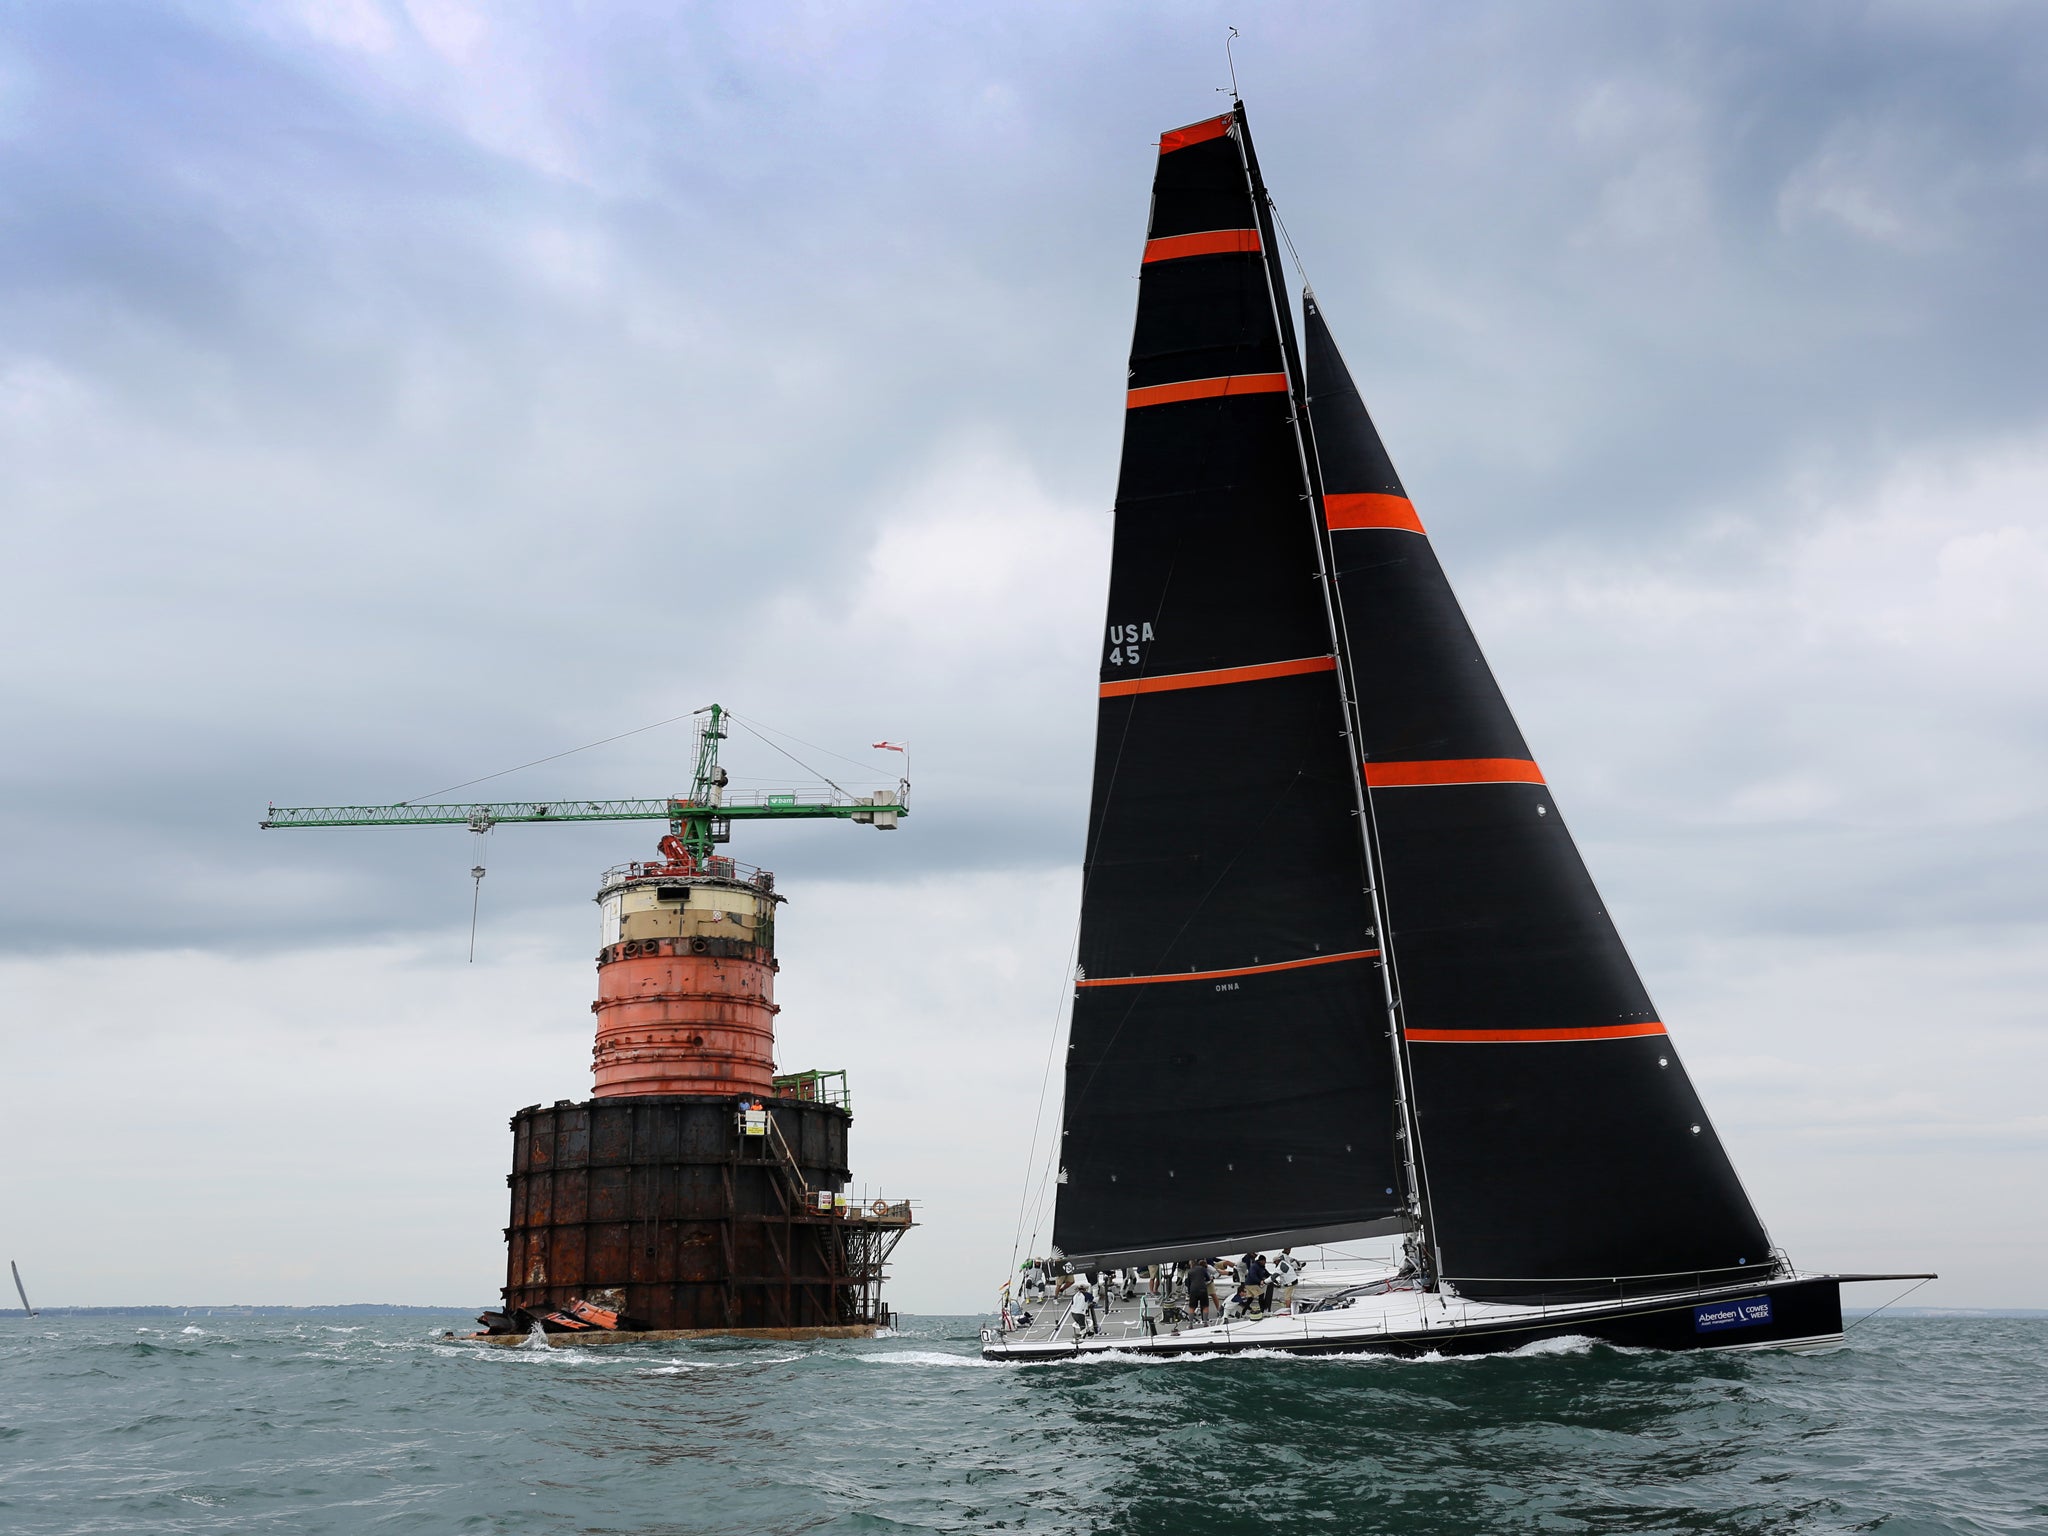 Out on her own, the 72-foot Bella Mente passes Nab Tower on her way to winning the New York Yacht Club Challenge Cup, one of the two top trophies in AAM Cowes Week.